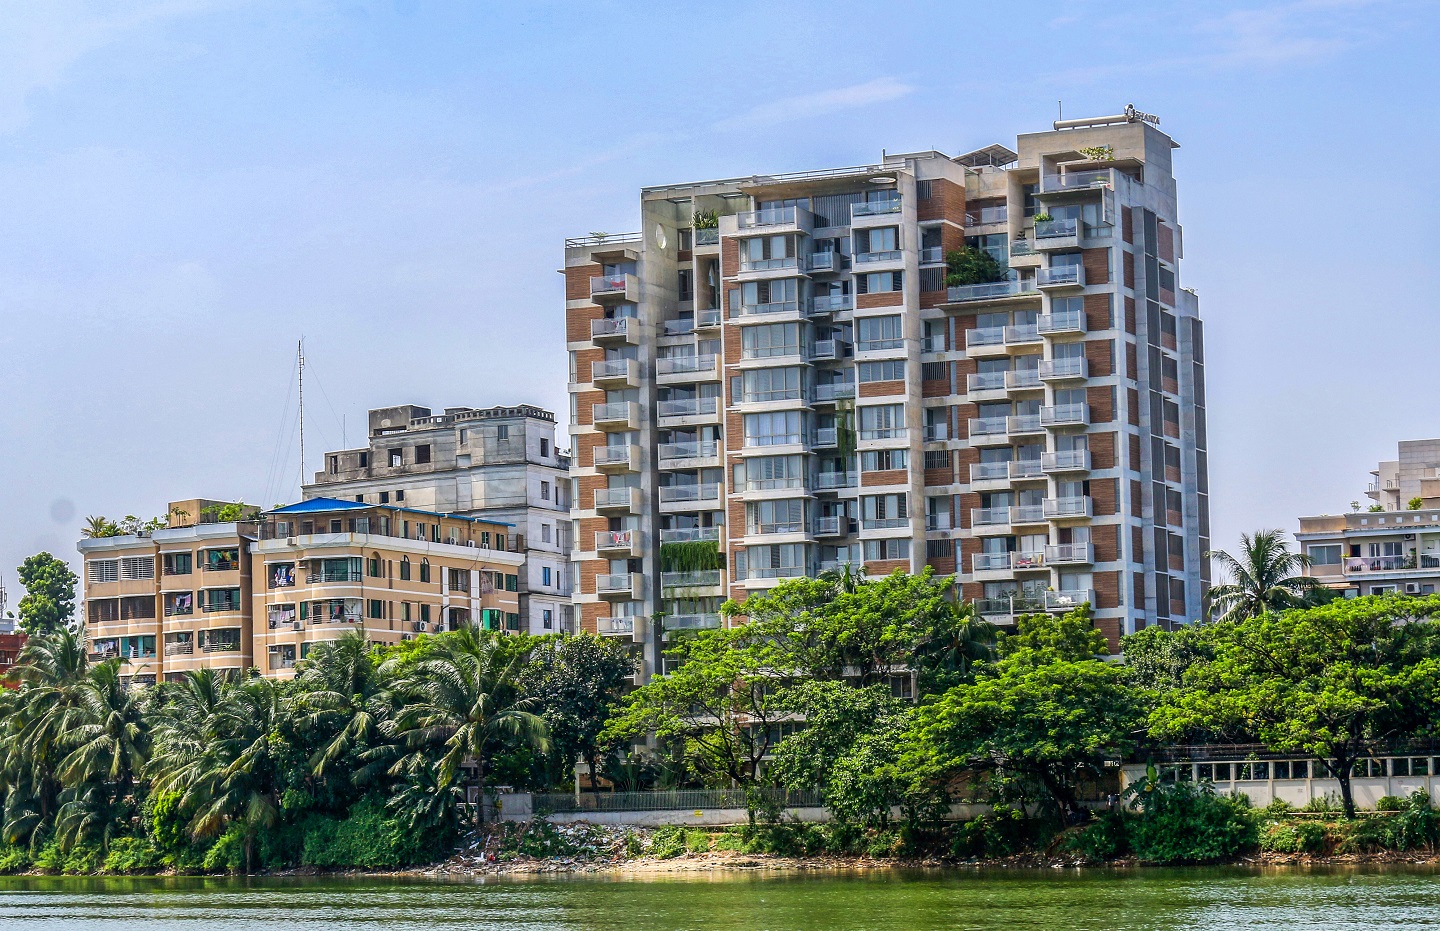 one of the prominent apartments in Dhaka